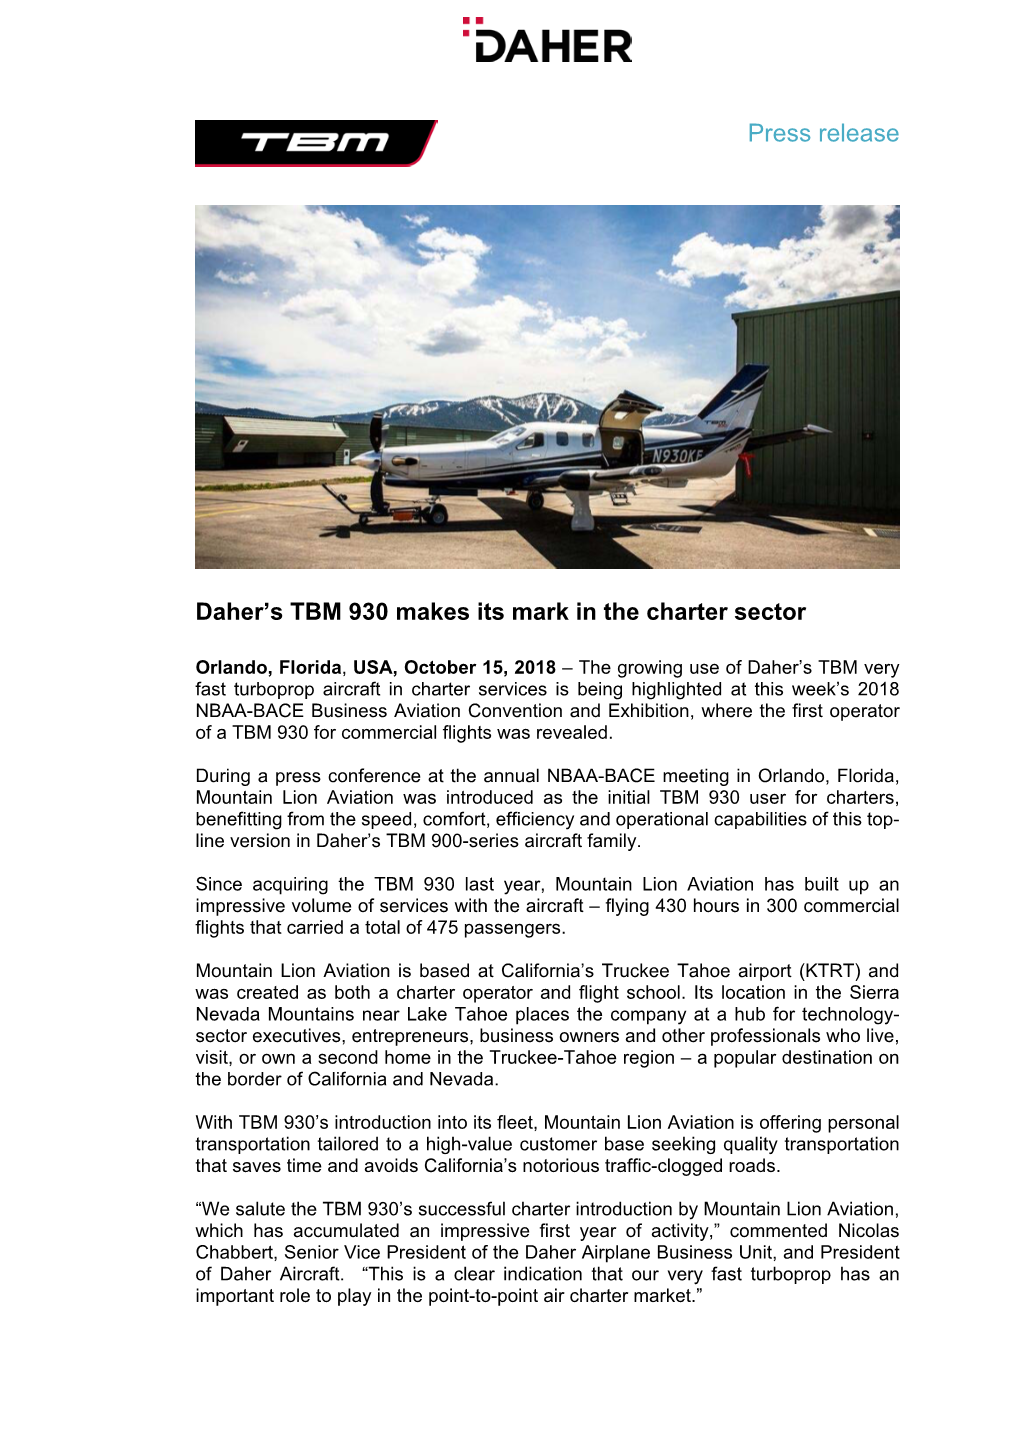 Daher's TBM 930 Makes Its Mark in the Charter Sector